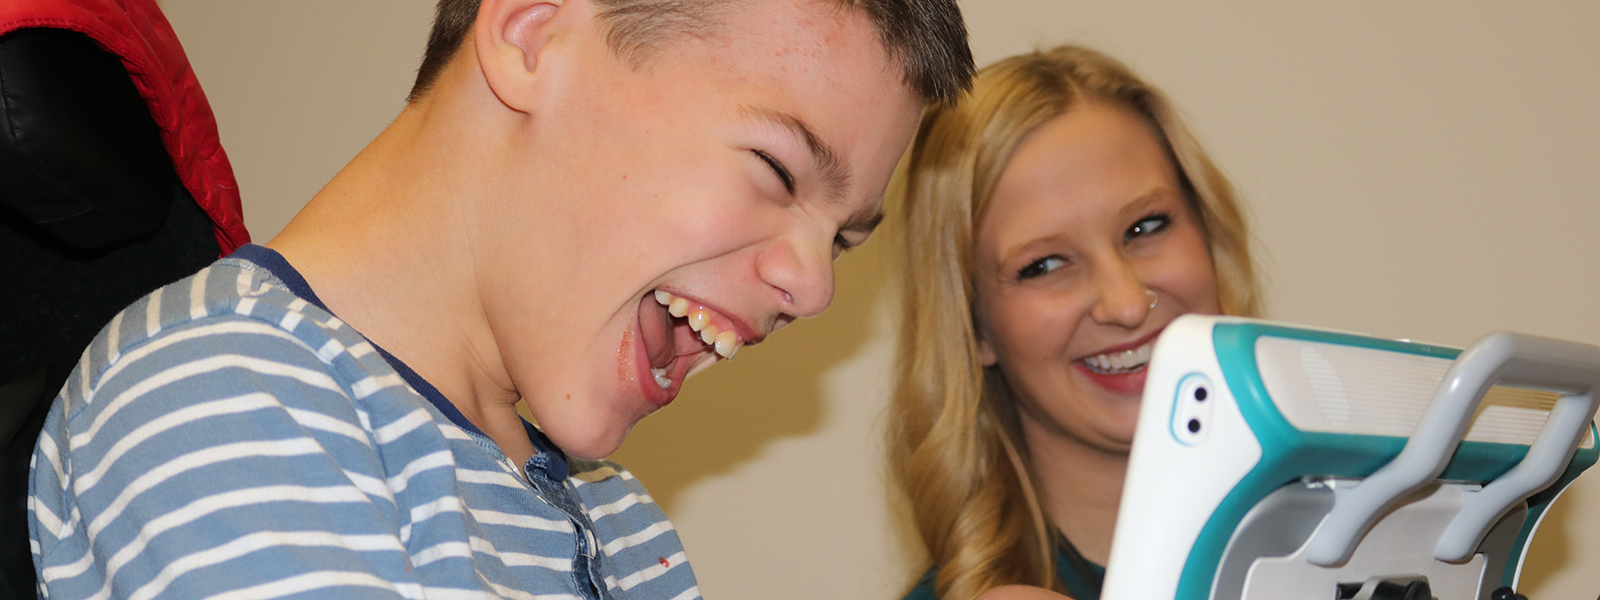 Kaden Bowen and speech-language pathology graduate student Audrey Hartwell share a laugh during Kaden's session at the Barkley Speech Language and Hearing Clinic.